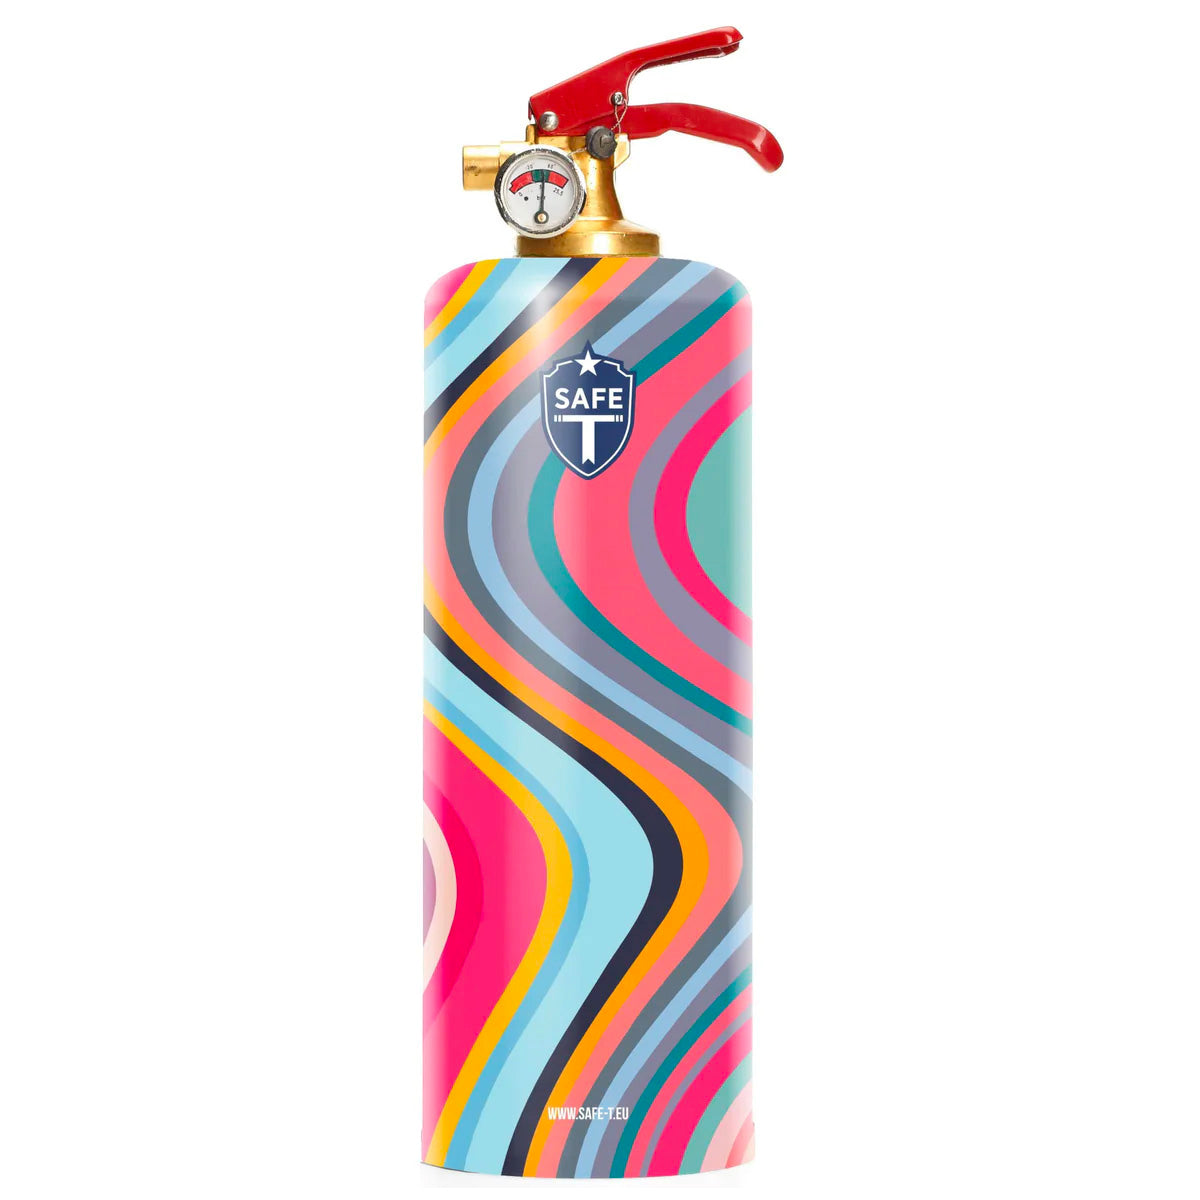 Ripples Fire Extinguisher